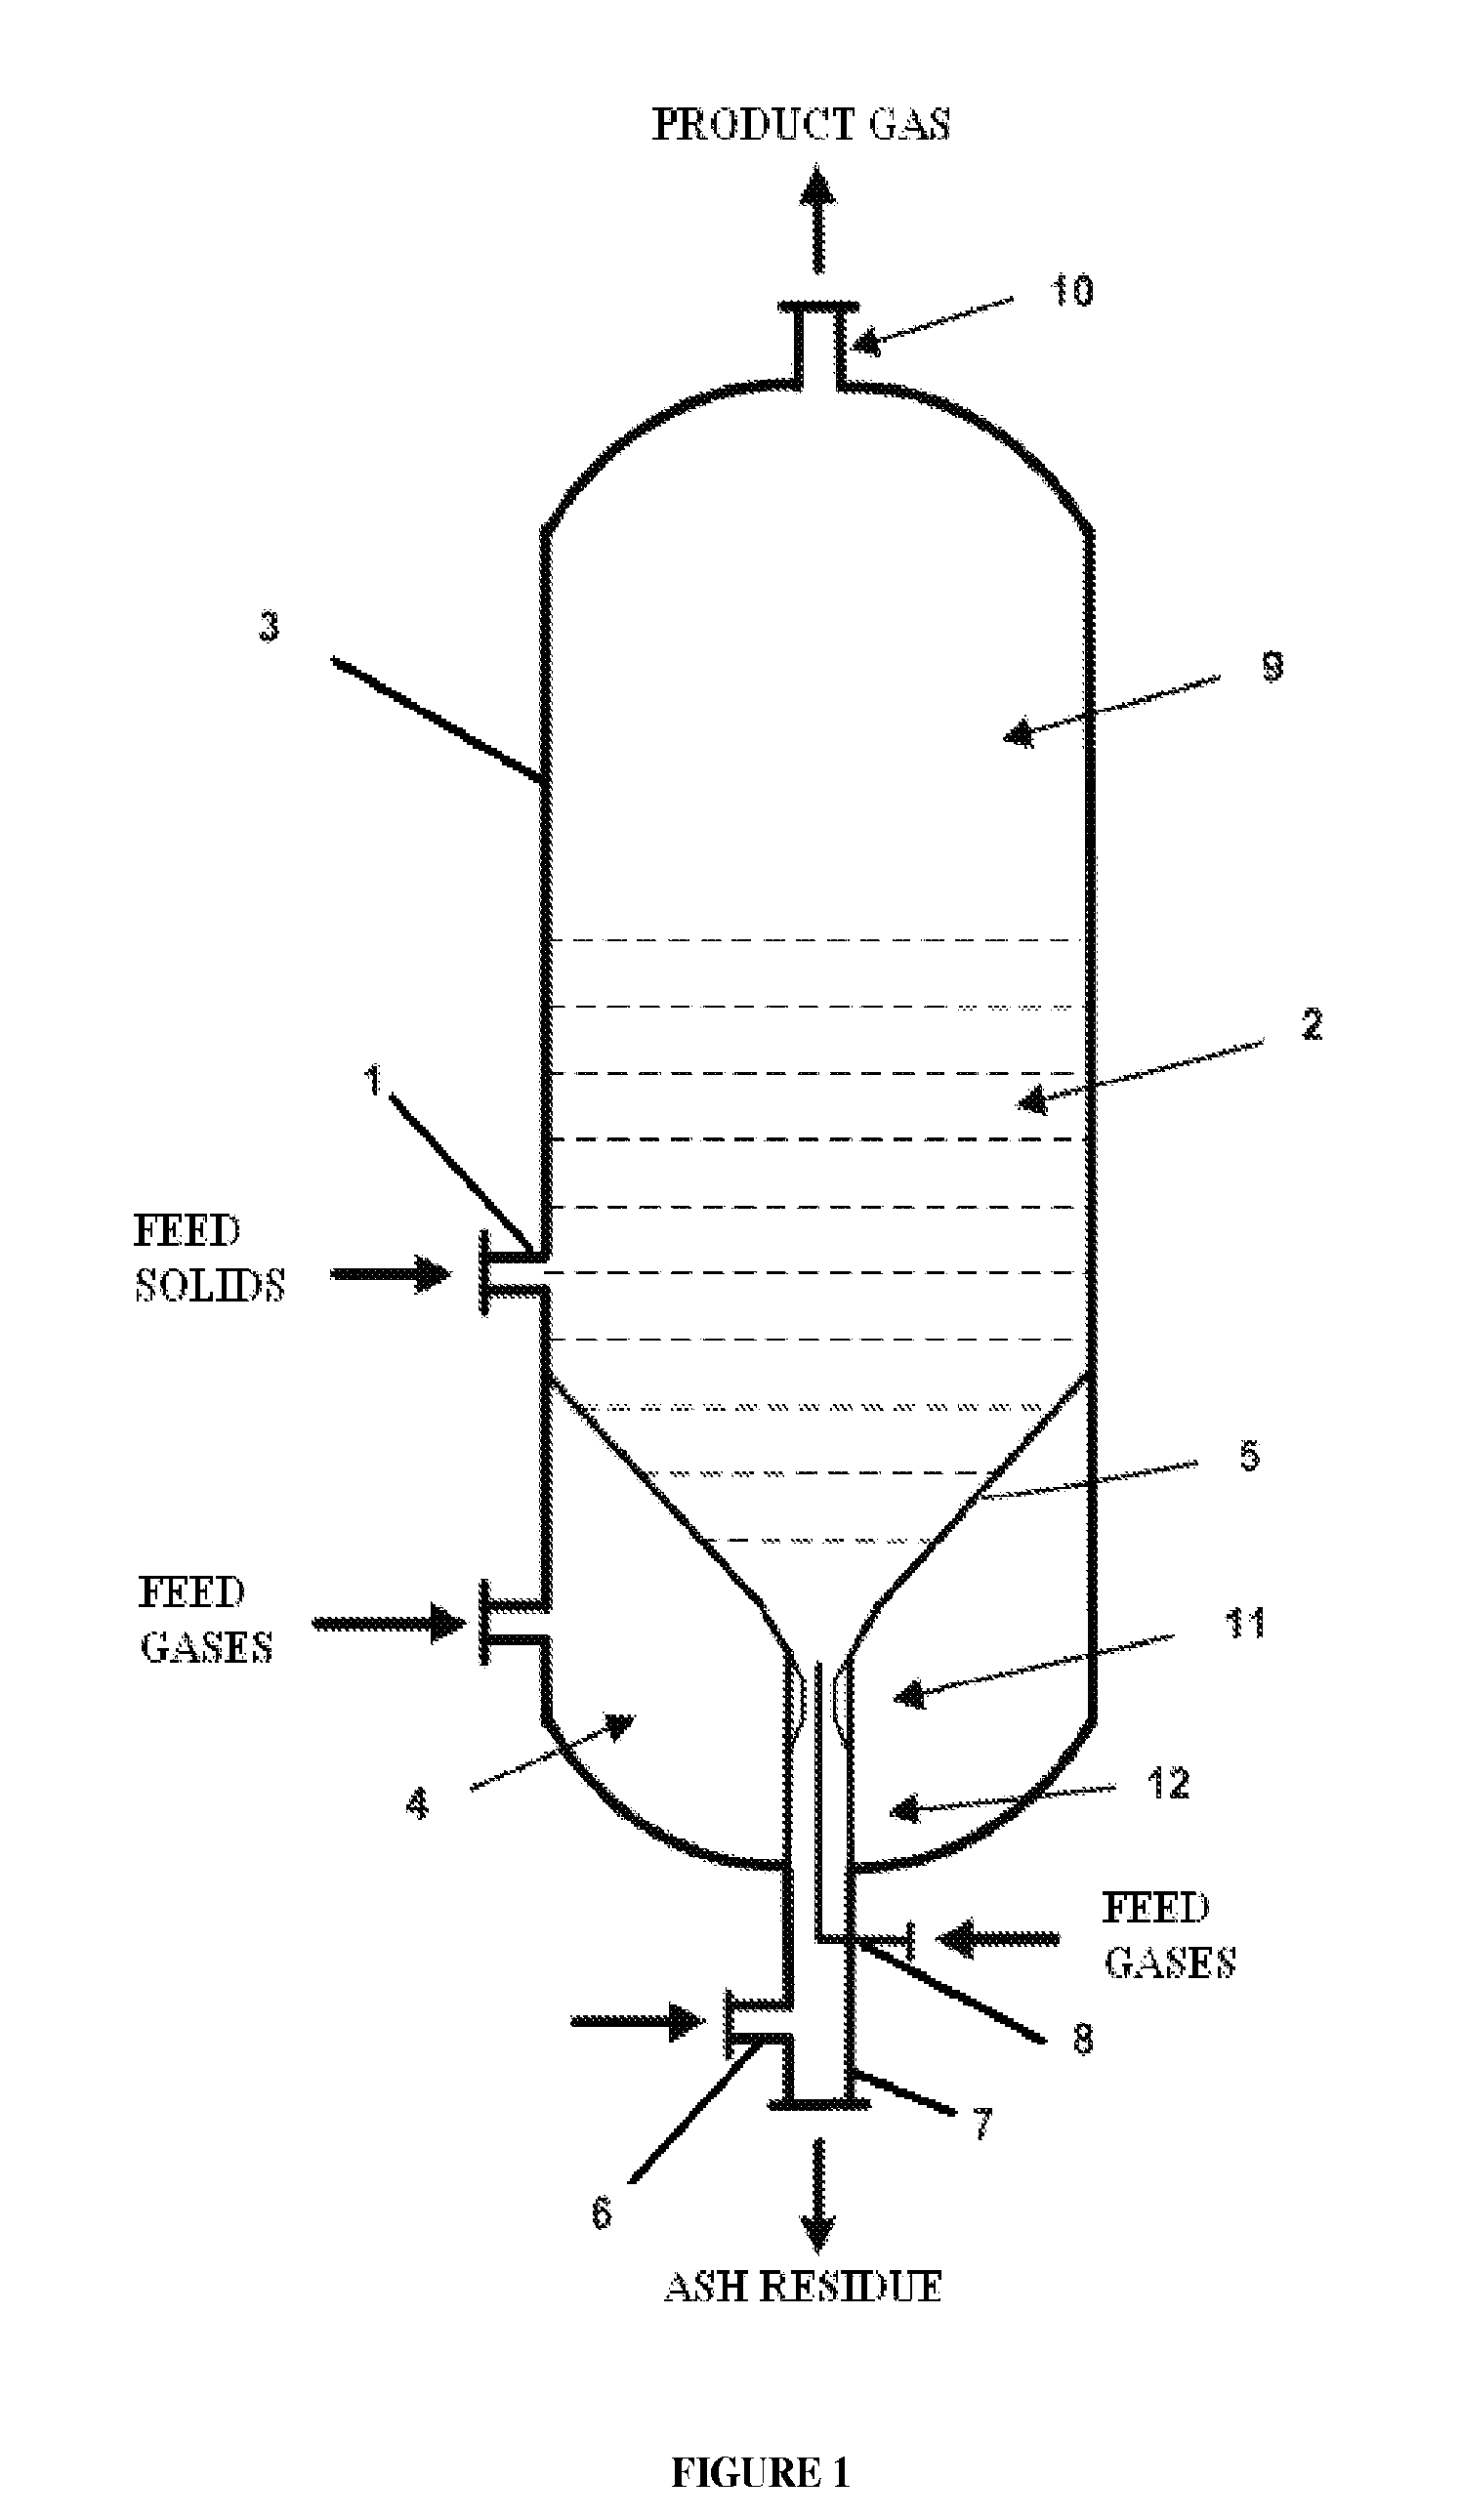 Fluidized bed gasifier with solids discharge and classification device